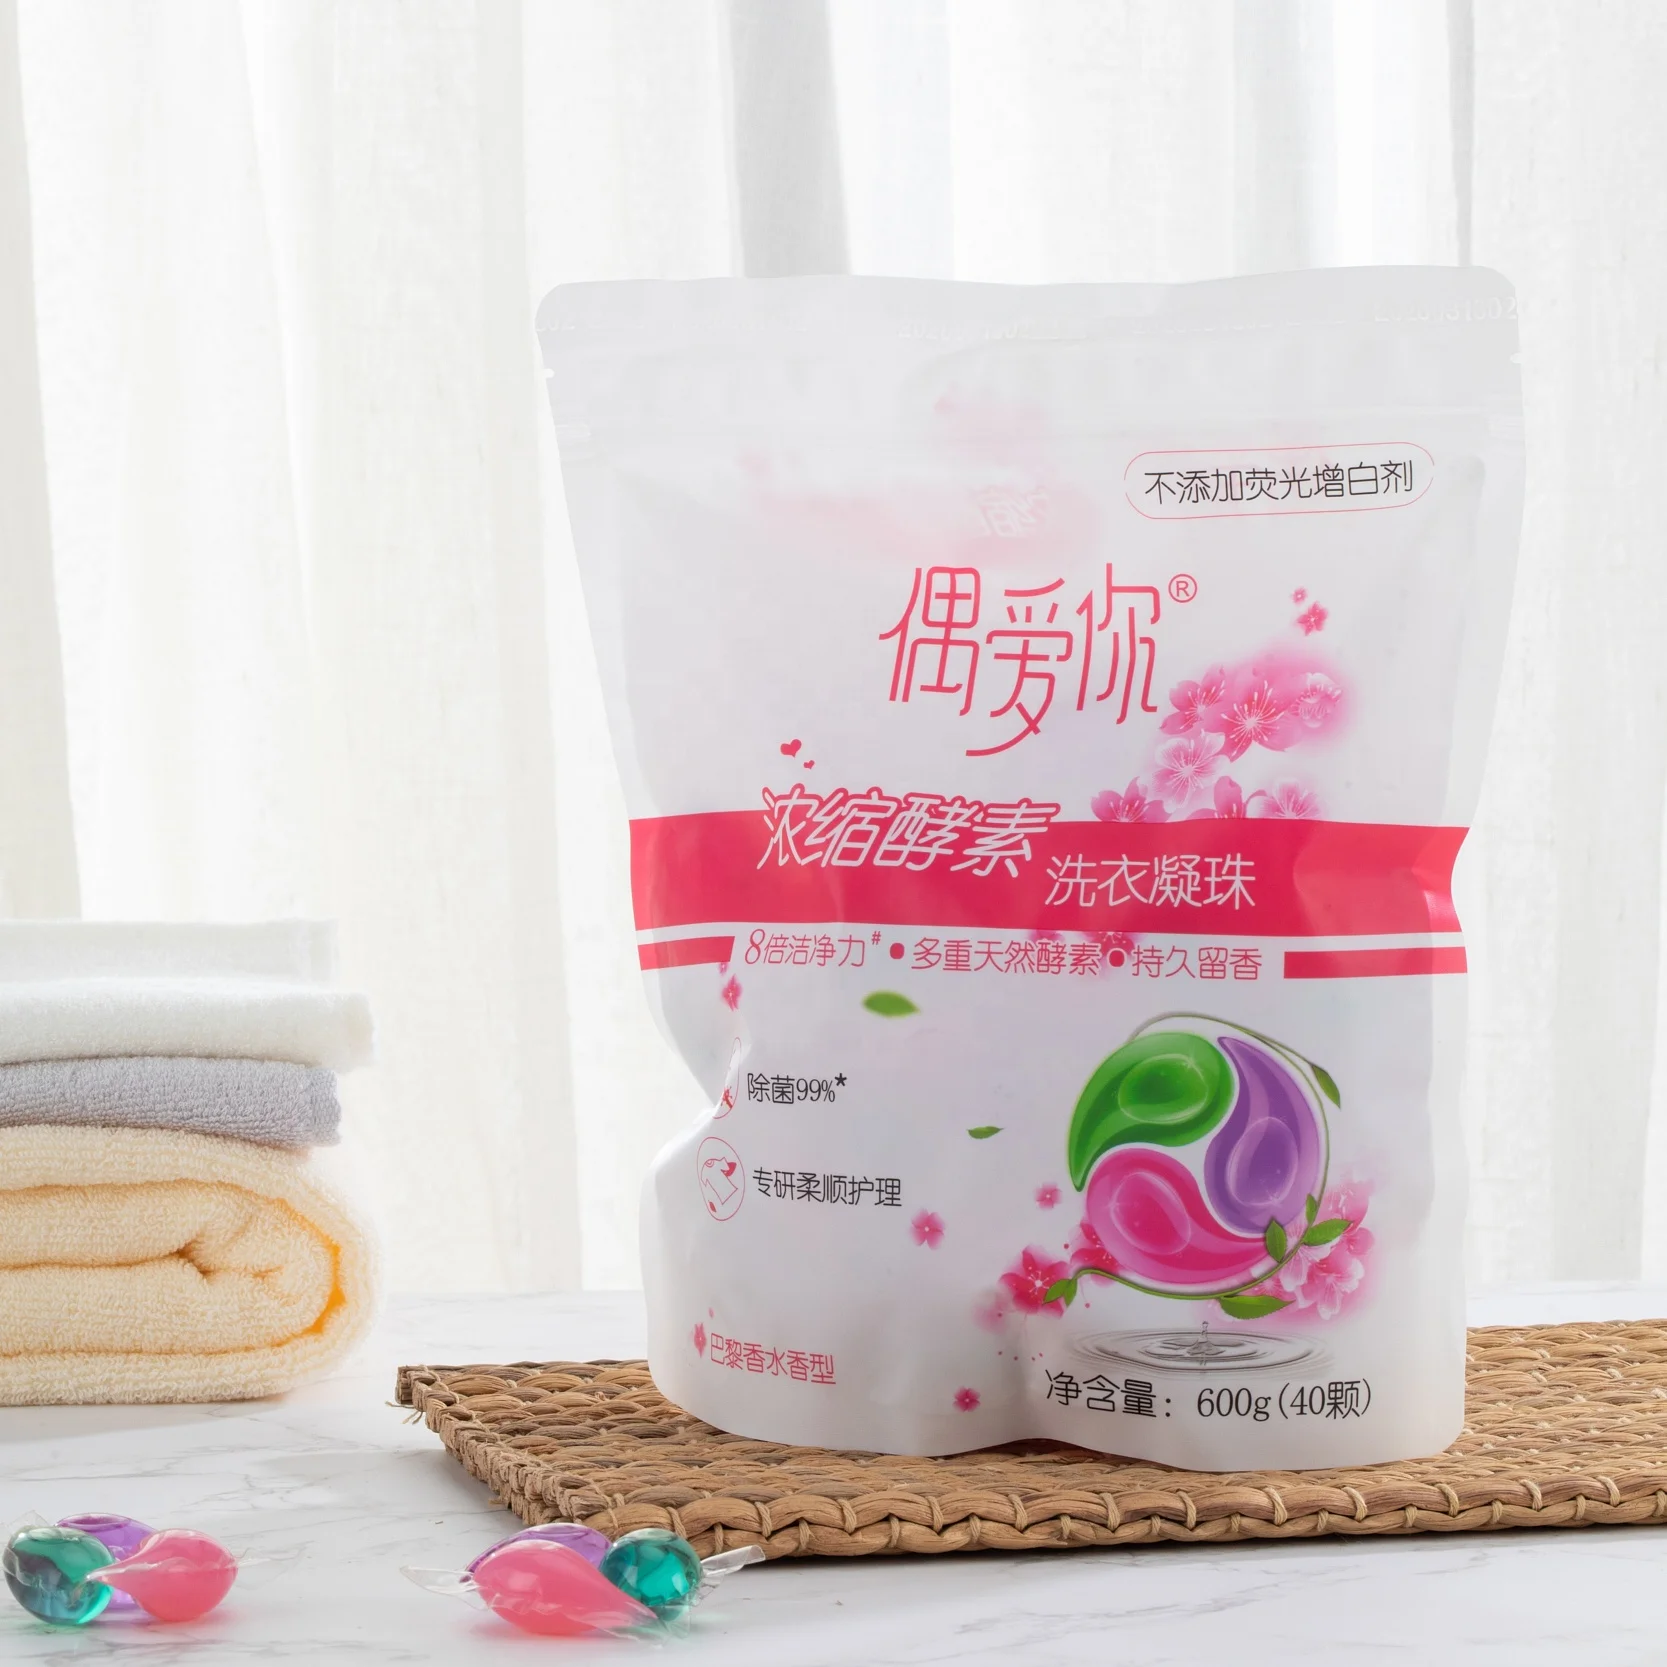 OEM private Label Detergent laundry detergent capsules washing concentrated cleaning scent pods